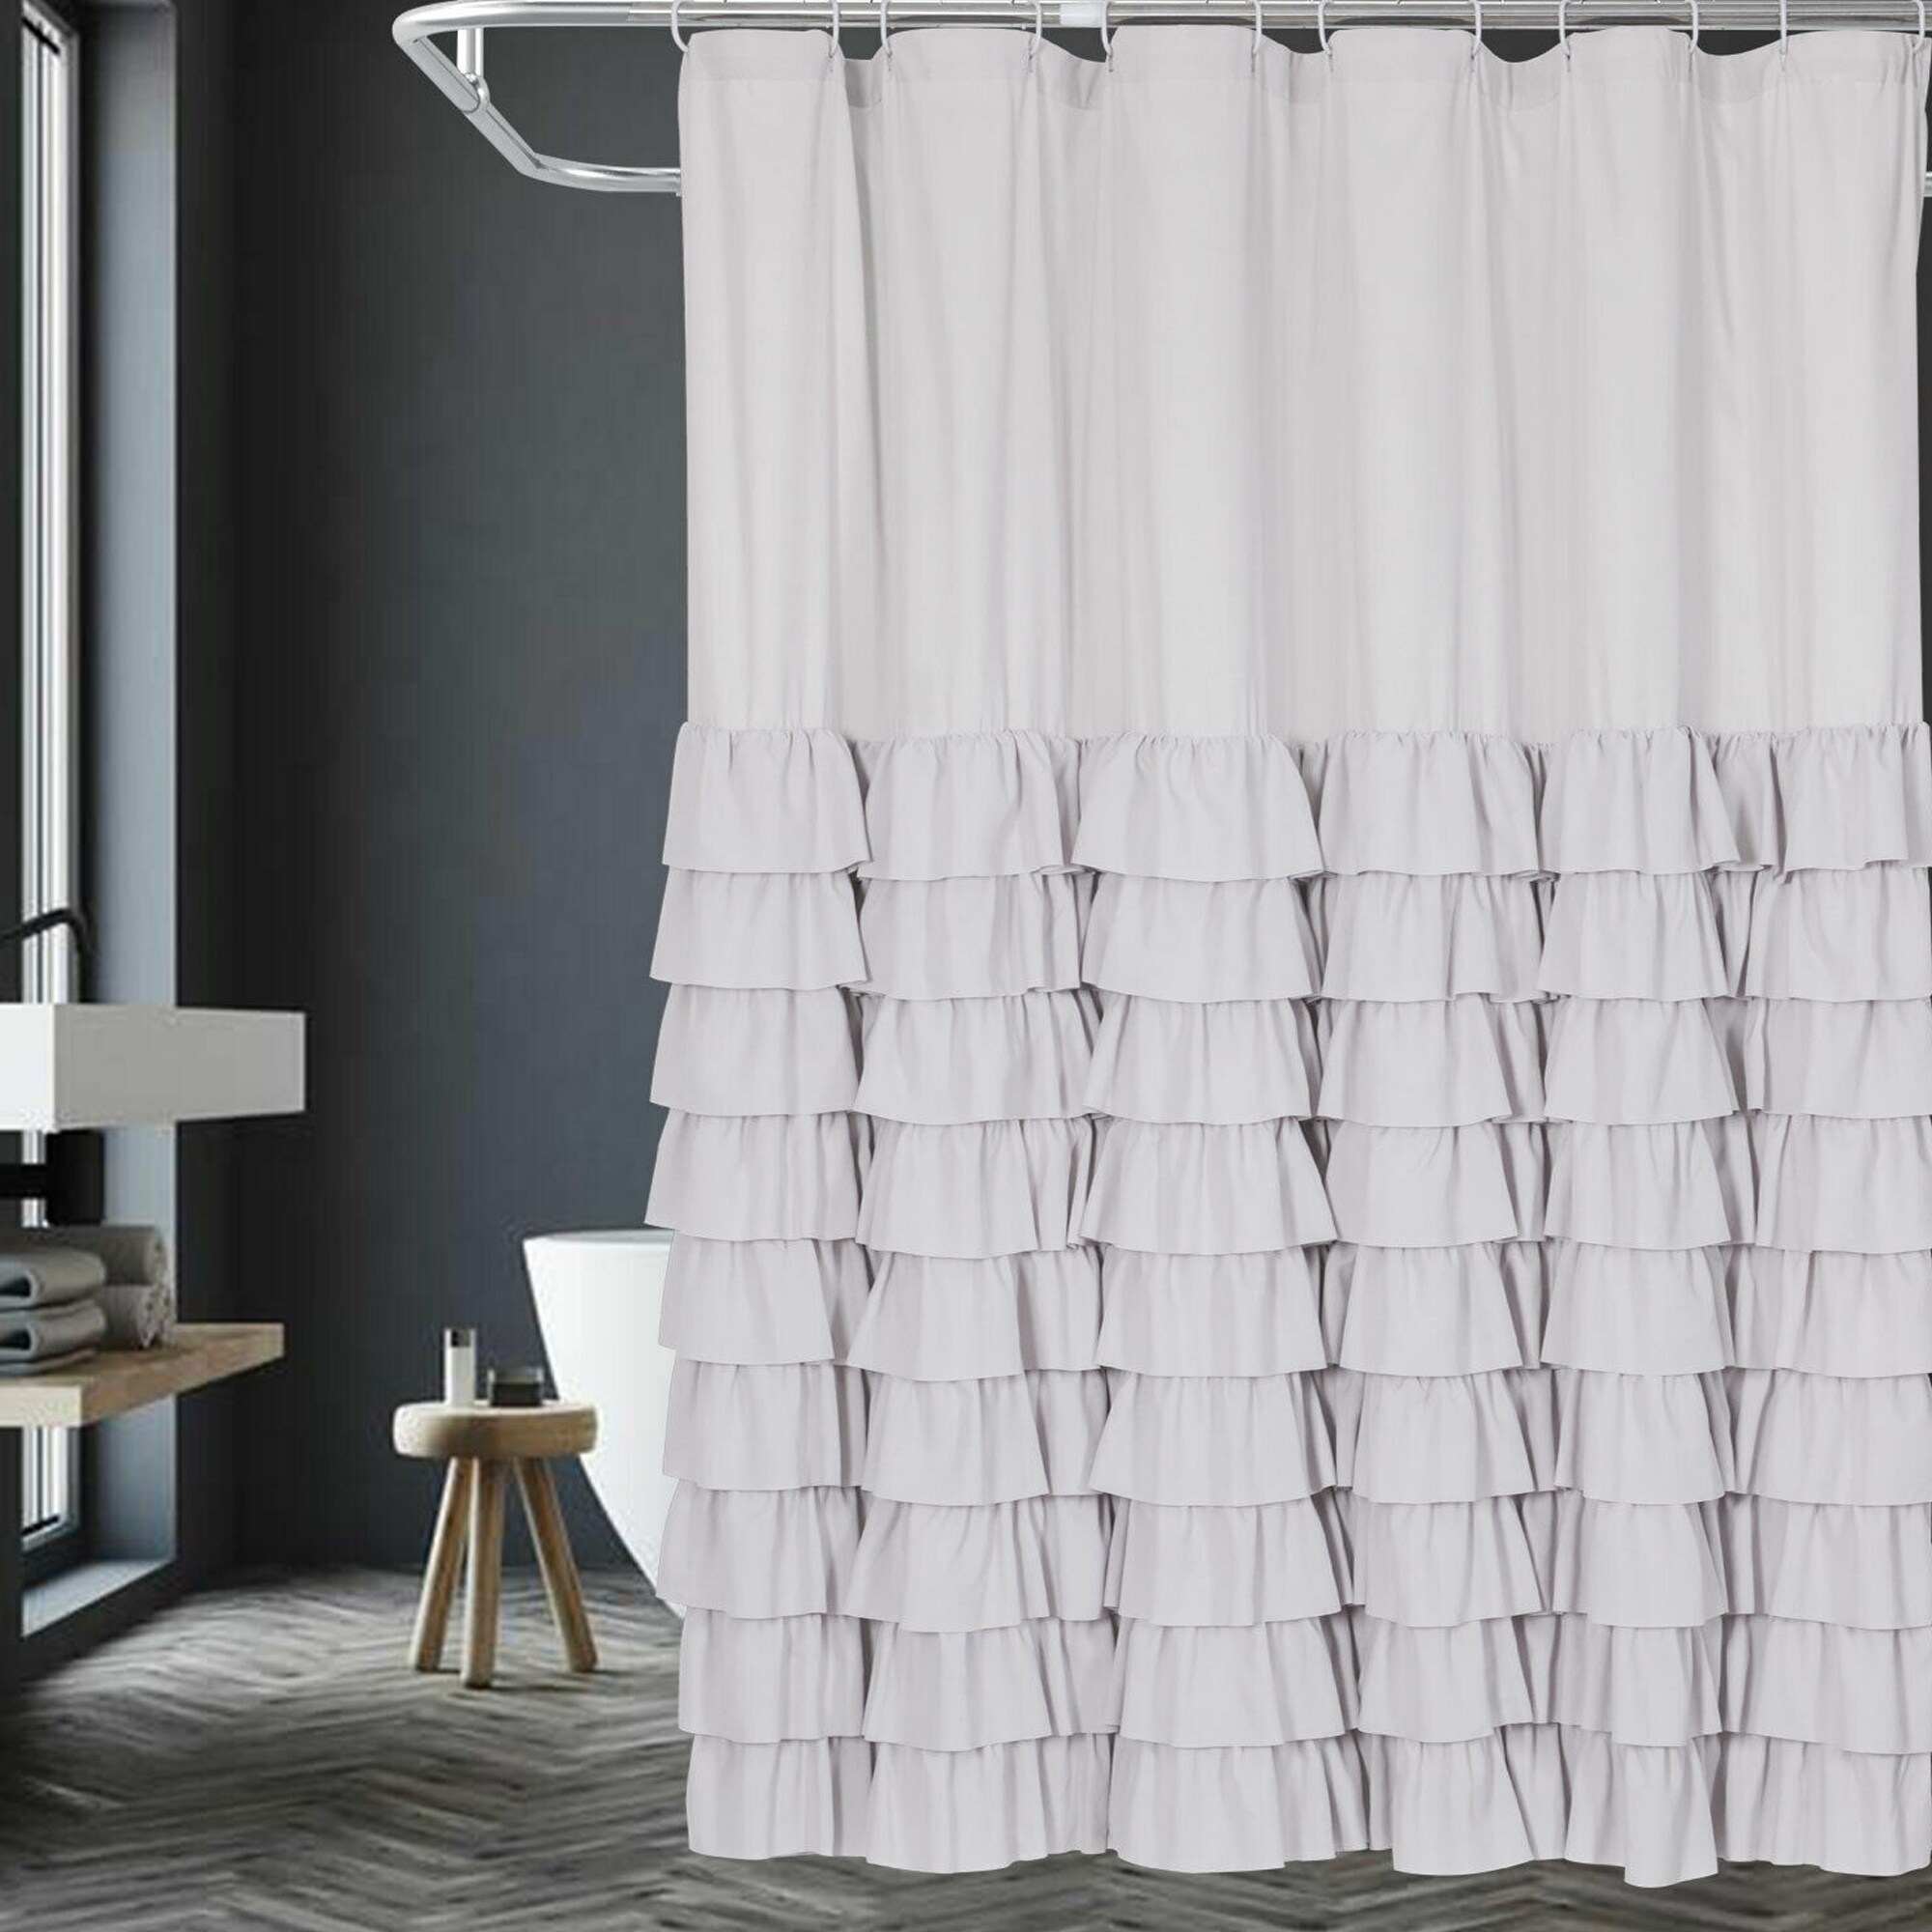 Gypsy Ruffled Voile Sheer Shower Curtain 72" wide x 72" long WHITE 